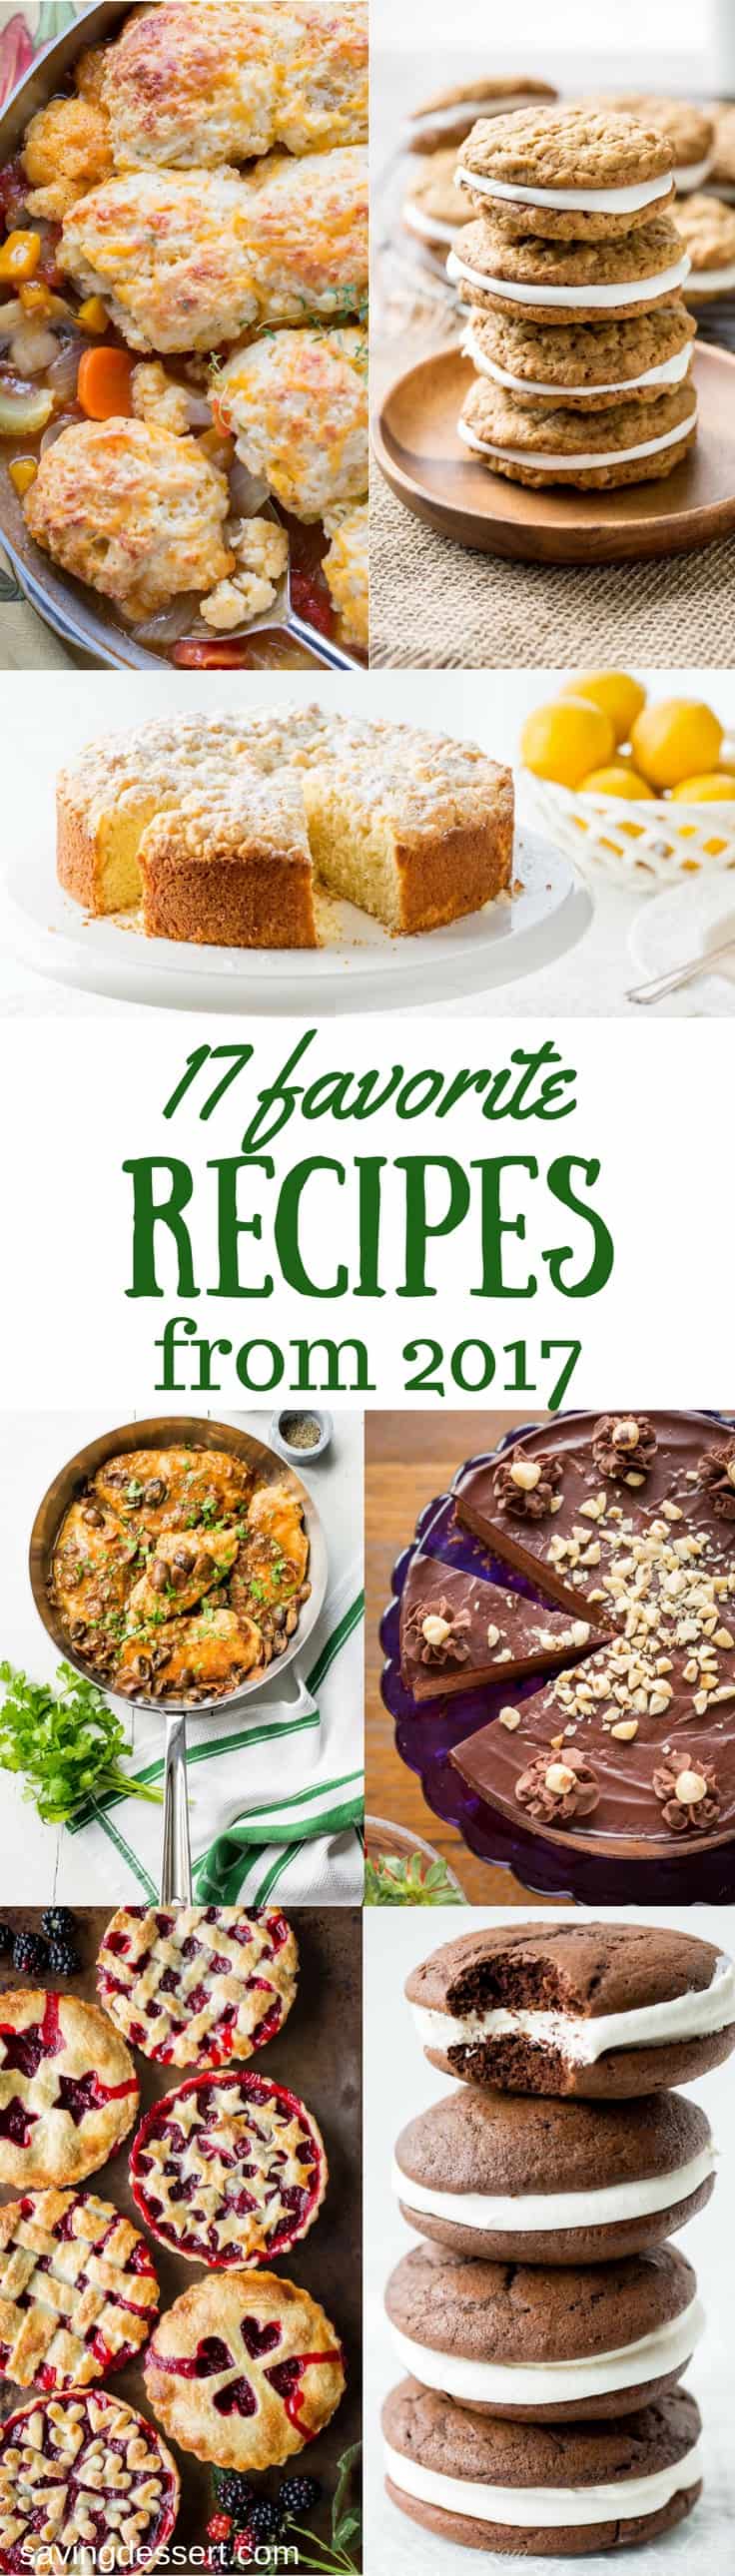 17 of our favorite recipes from 2017 ~ from soups and stews, to casseroles, pies and cakes, 2017 was a great year here at Saving Room for Dessert! www.savingdessert.com #savingroomfordessert #bestrecipes2017 #bestrecipes